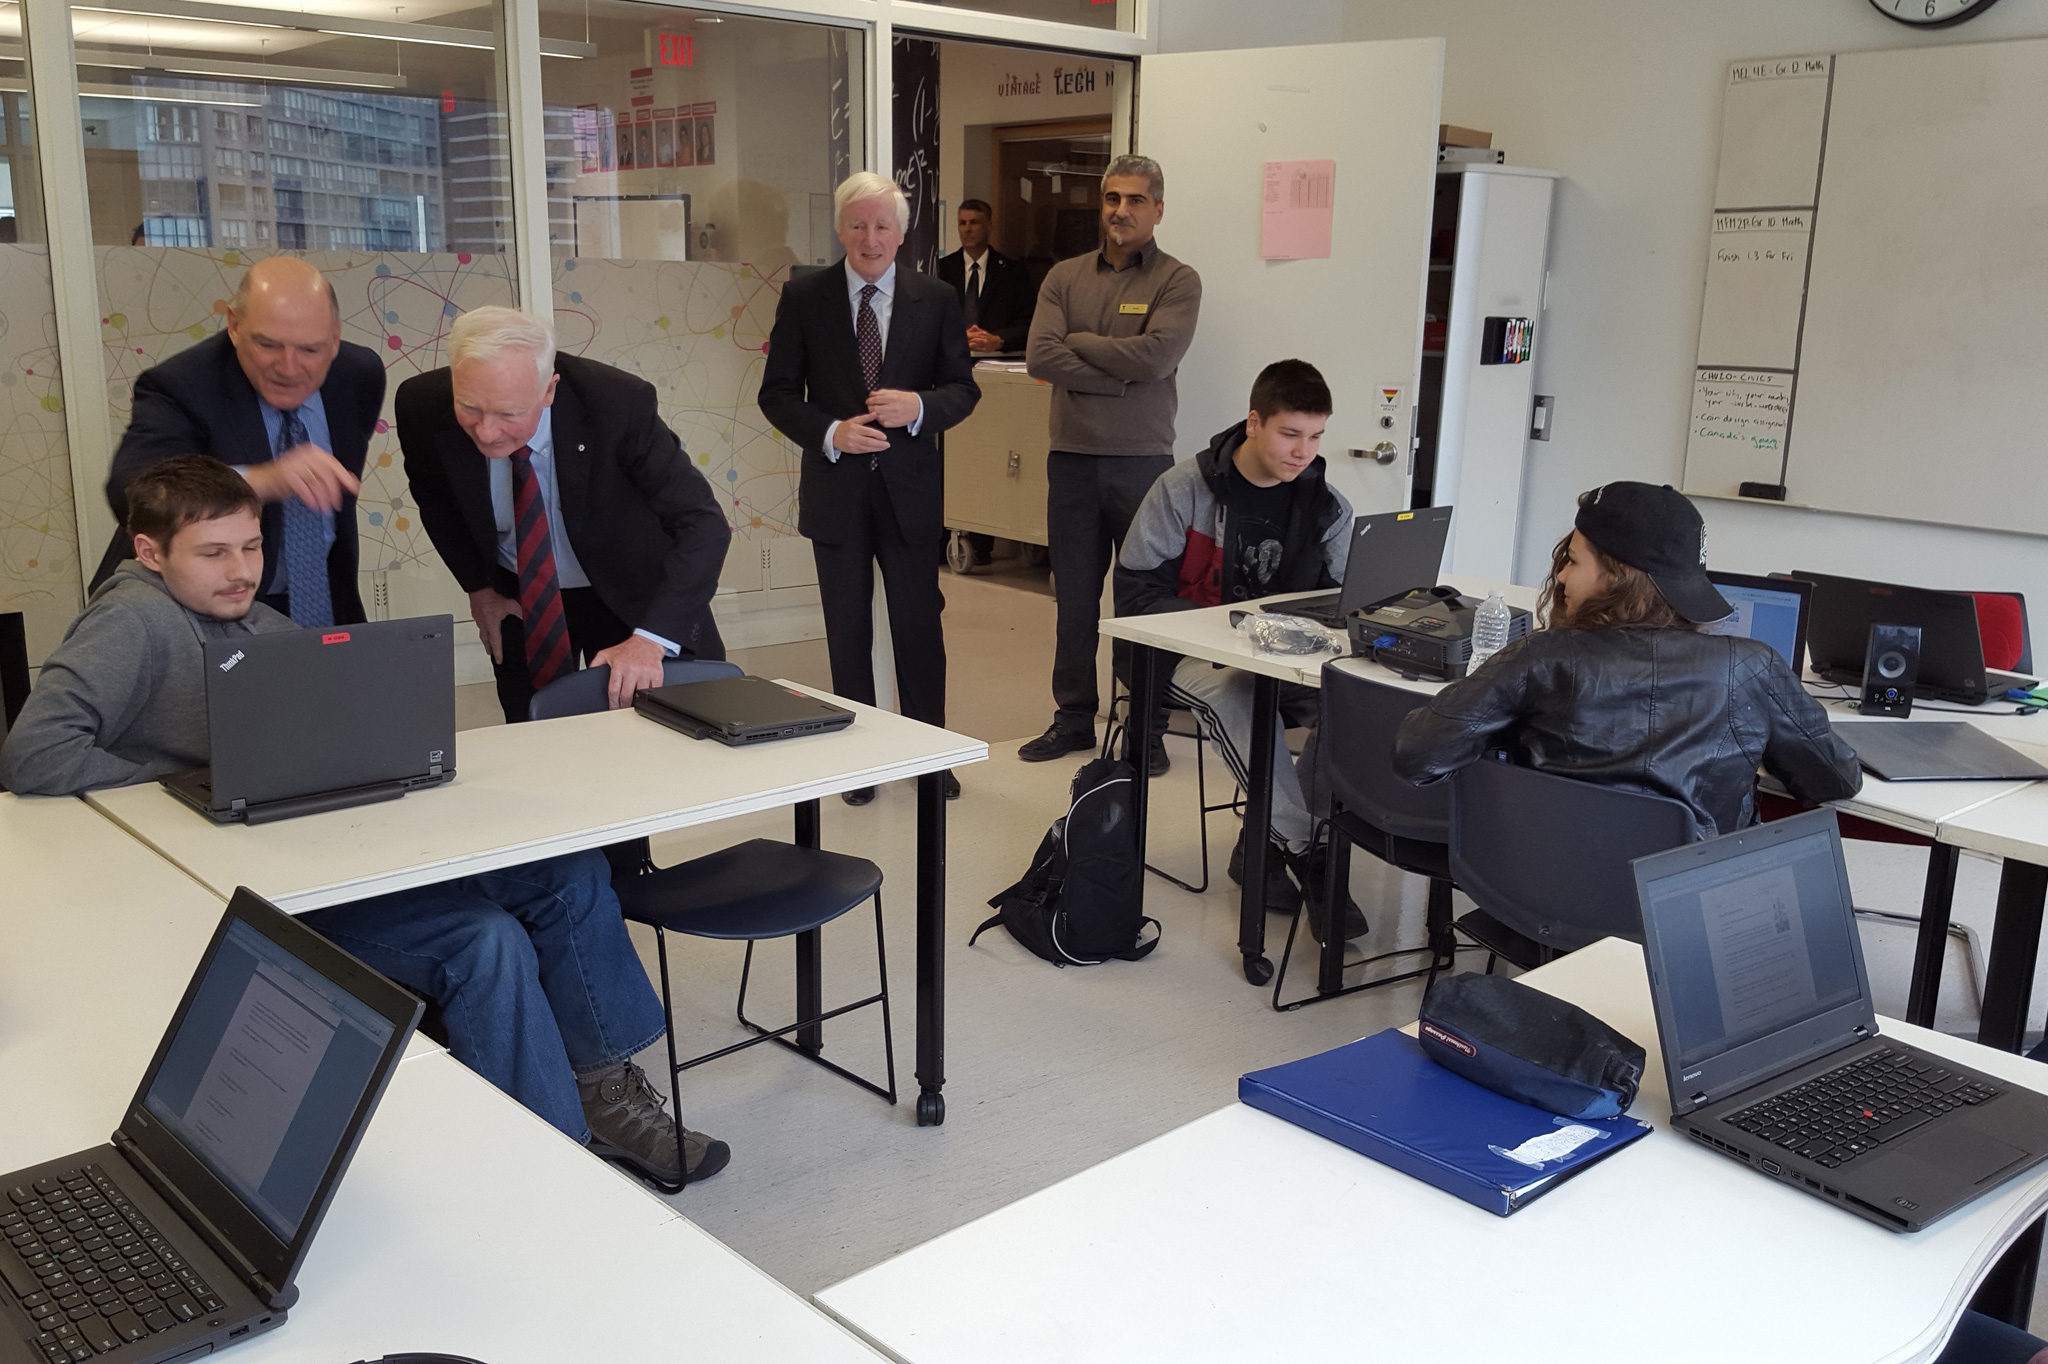 Governor General David Johnston and guests meet with YMCA Academy Civics students